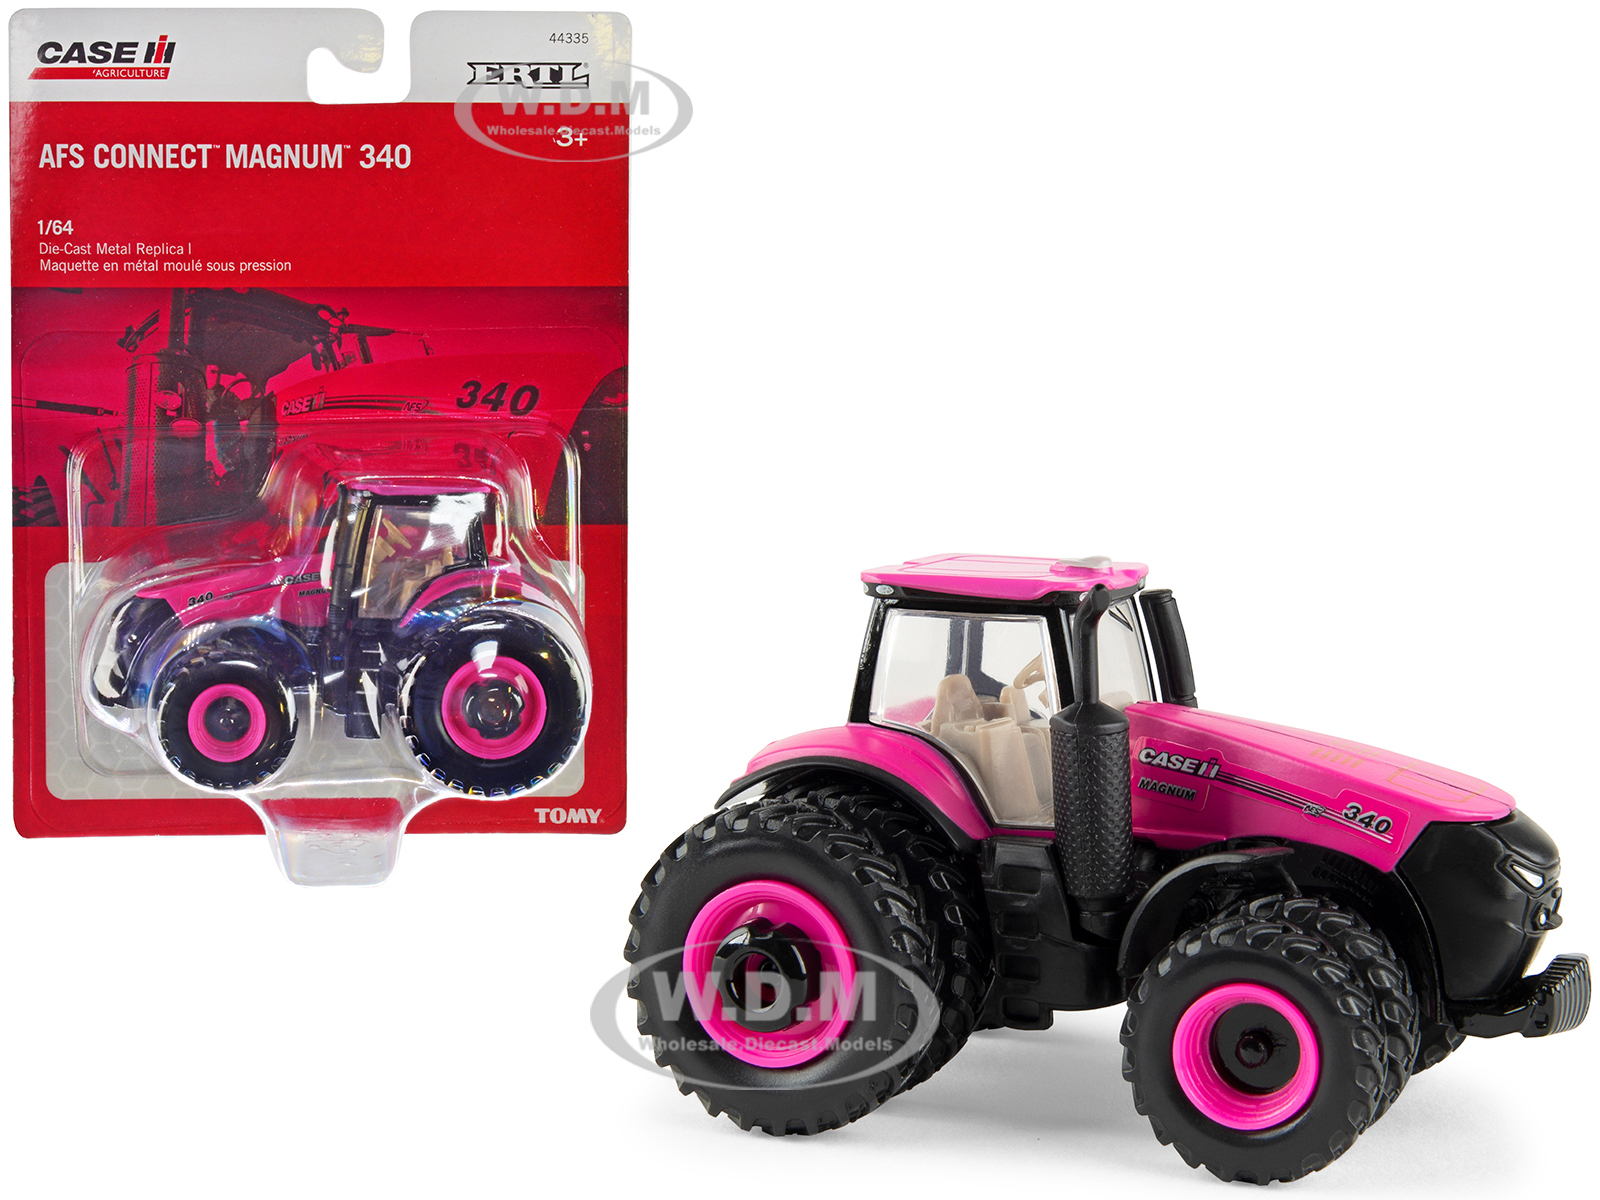 Case IH AFS Connect Magnum 340 Tractor Magenta with Dual Wheels "Case IH Agriculture" 1/64 Diecast Model by ERTL TOMY